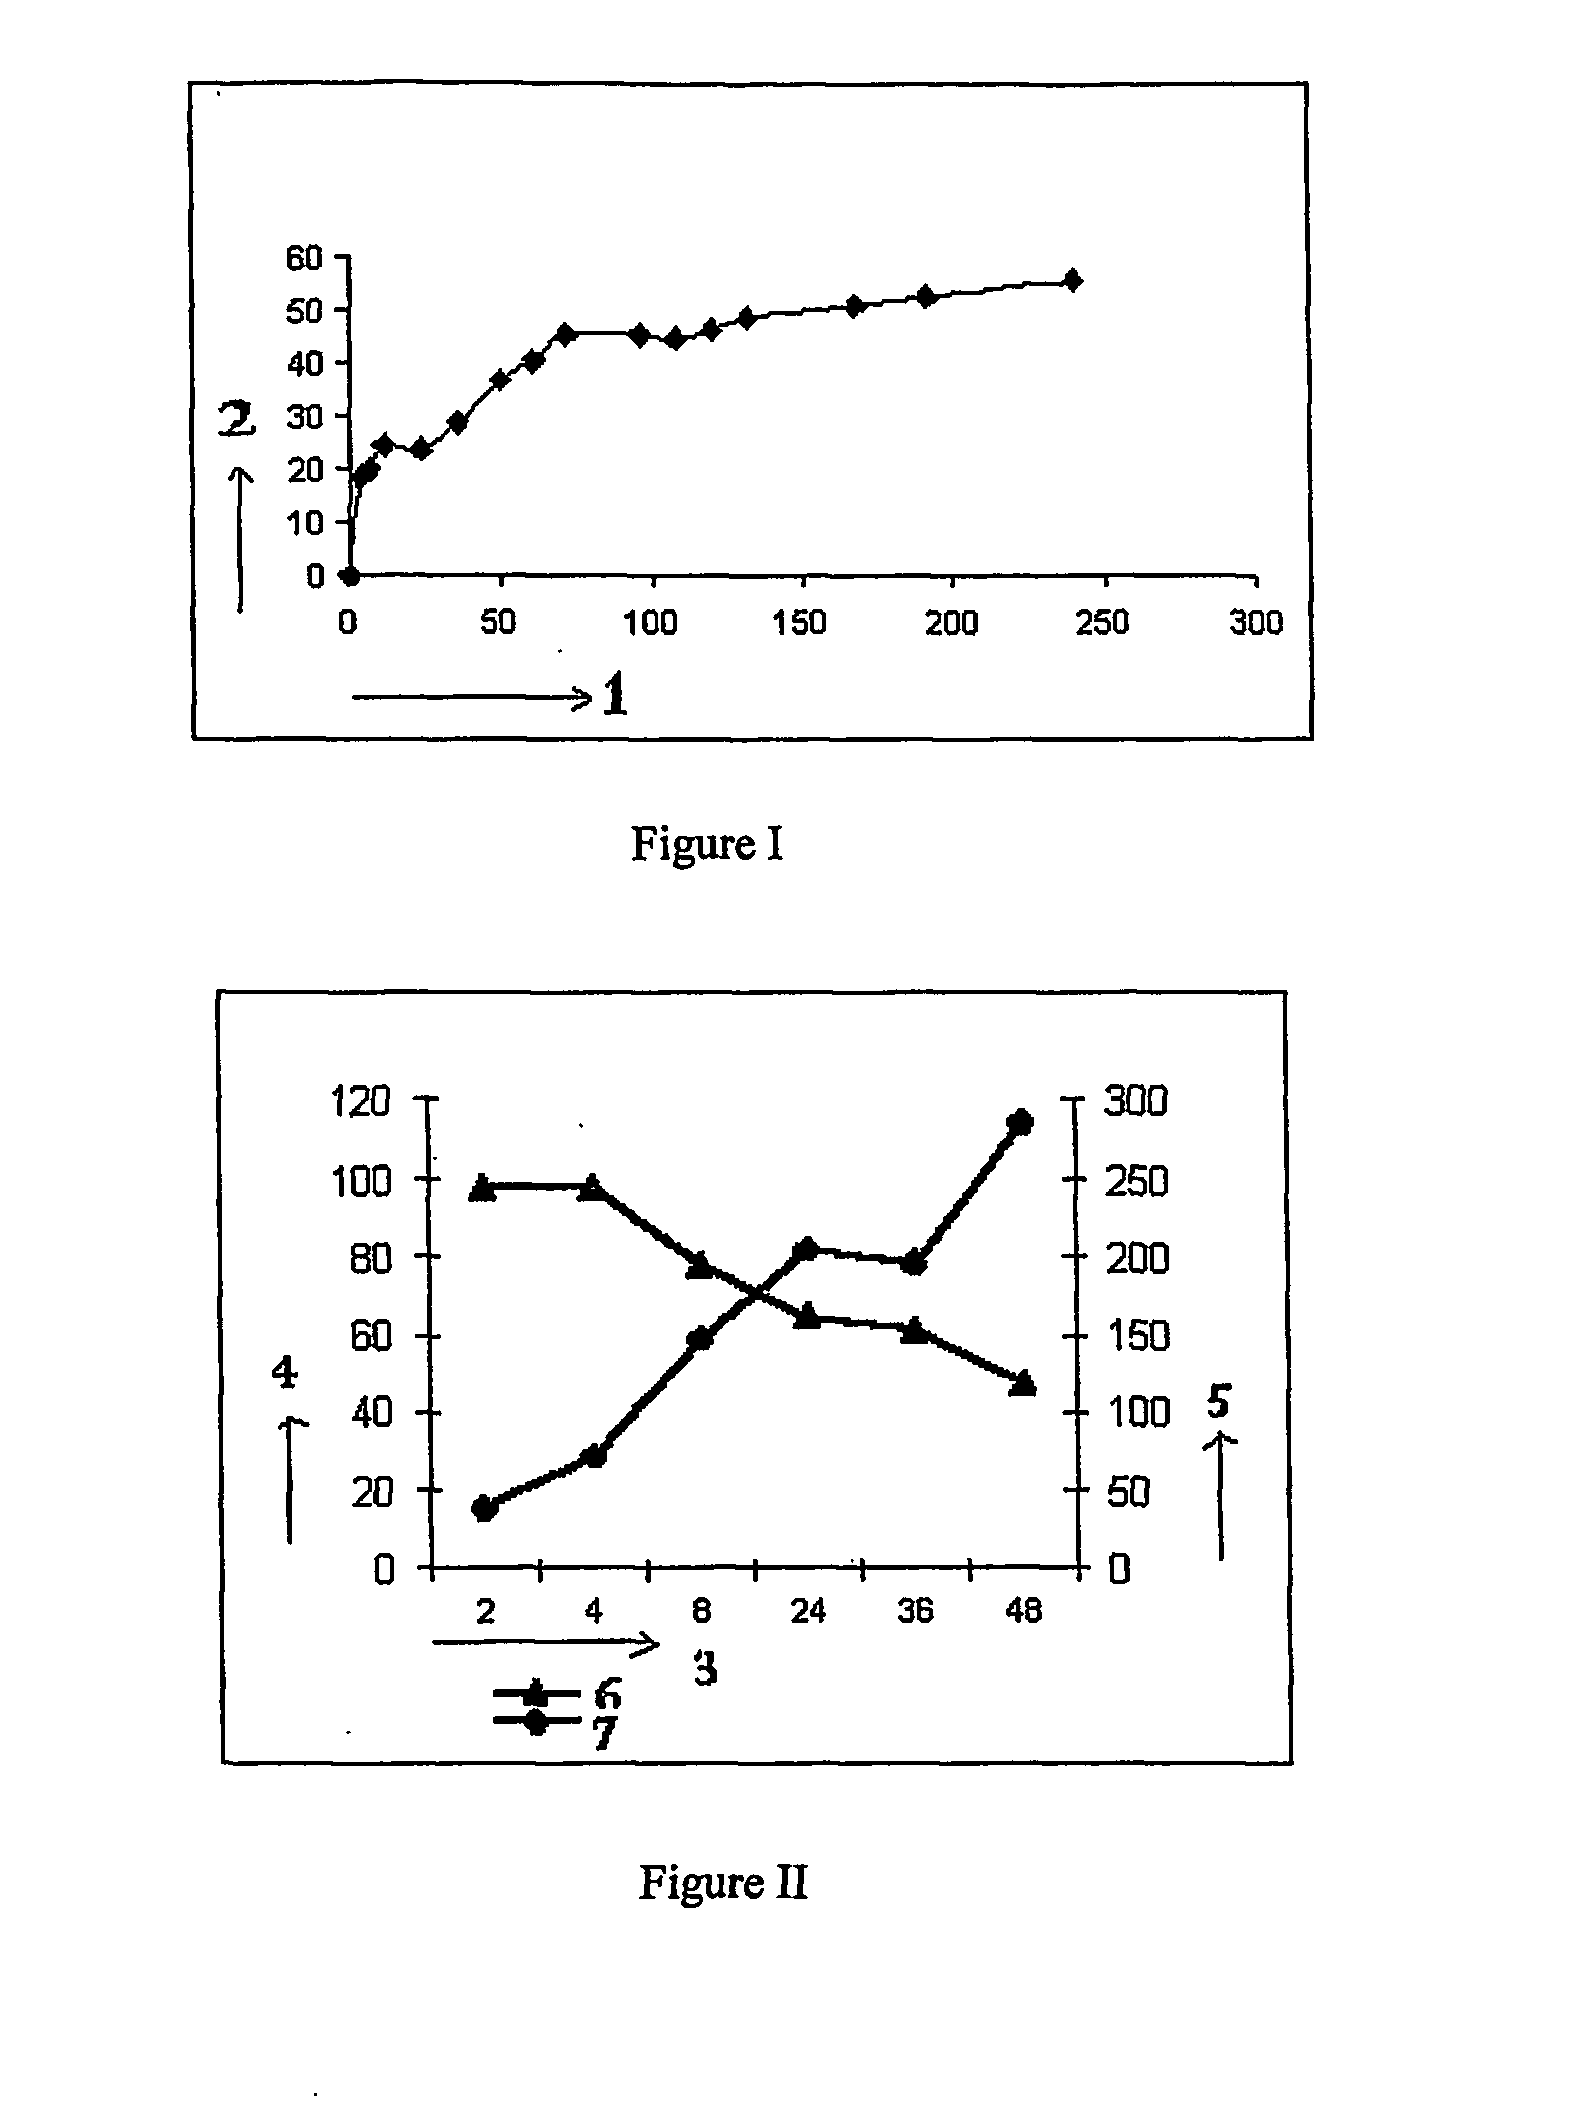 Novel biodegradable aliphatic polyesters and pharmaceutical compositions and applications thereof